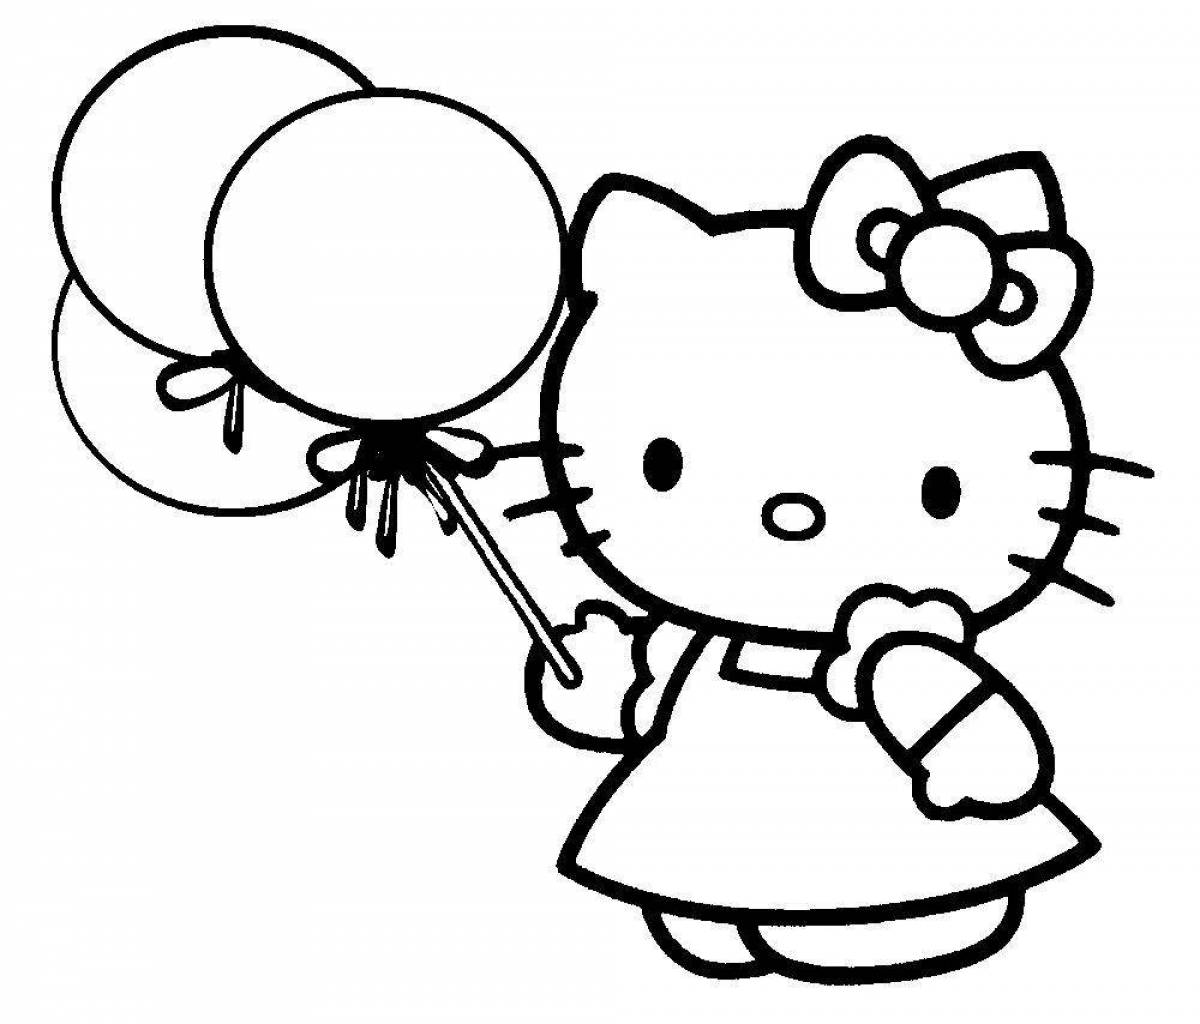 Milady hello kitty coloring book